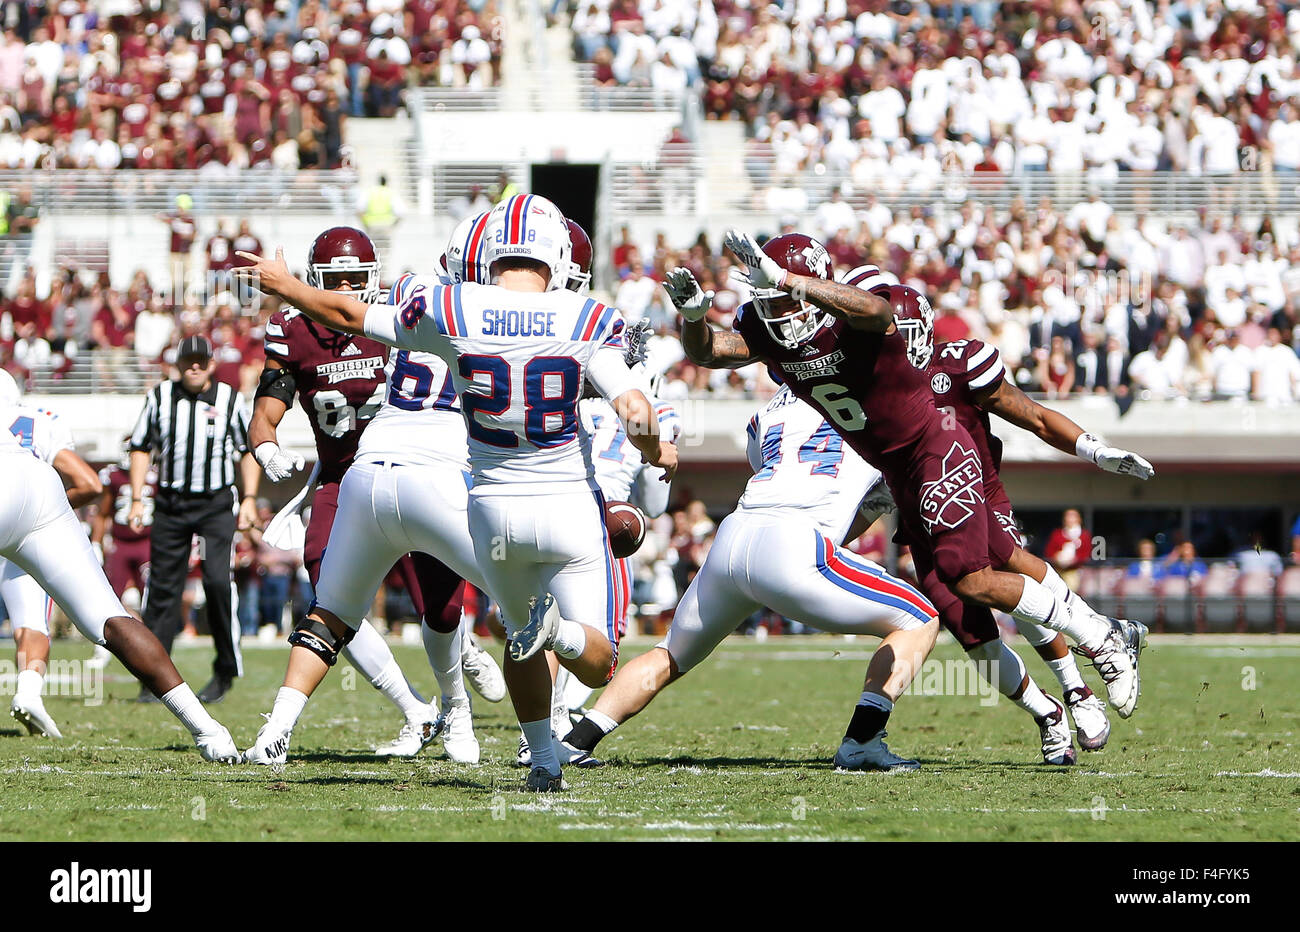 Starkville, MS, USA. 17th Oct, 2015. Mississippi State Bulldogs wide receiver Donald Gray (6) blocks a punt during the NCAA Football game between the Mississippi State Bulldogs and the Louisiana Tech Bulldogs at Davis Wade Stadium in Starkville, MS. Chuck Lick/CSM/Alamy Live News Stock Photo